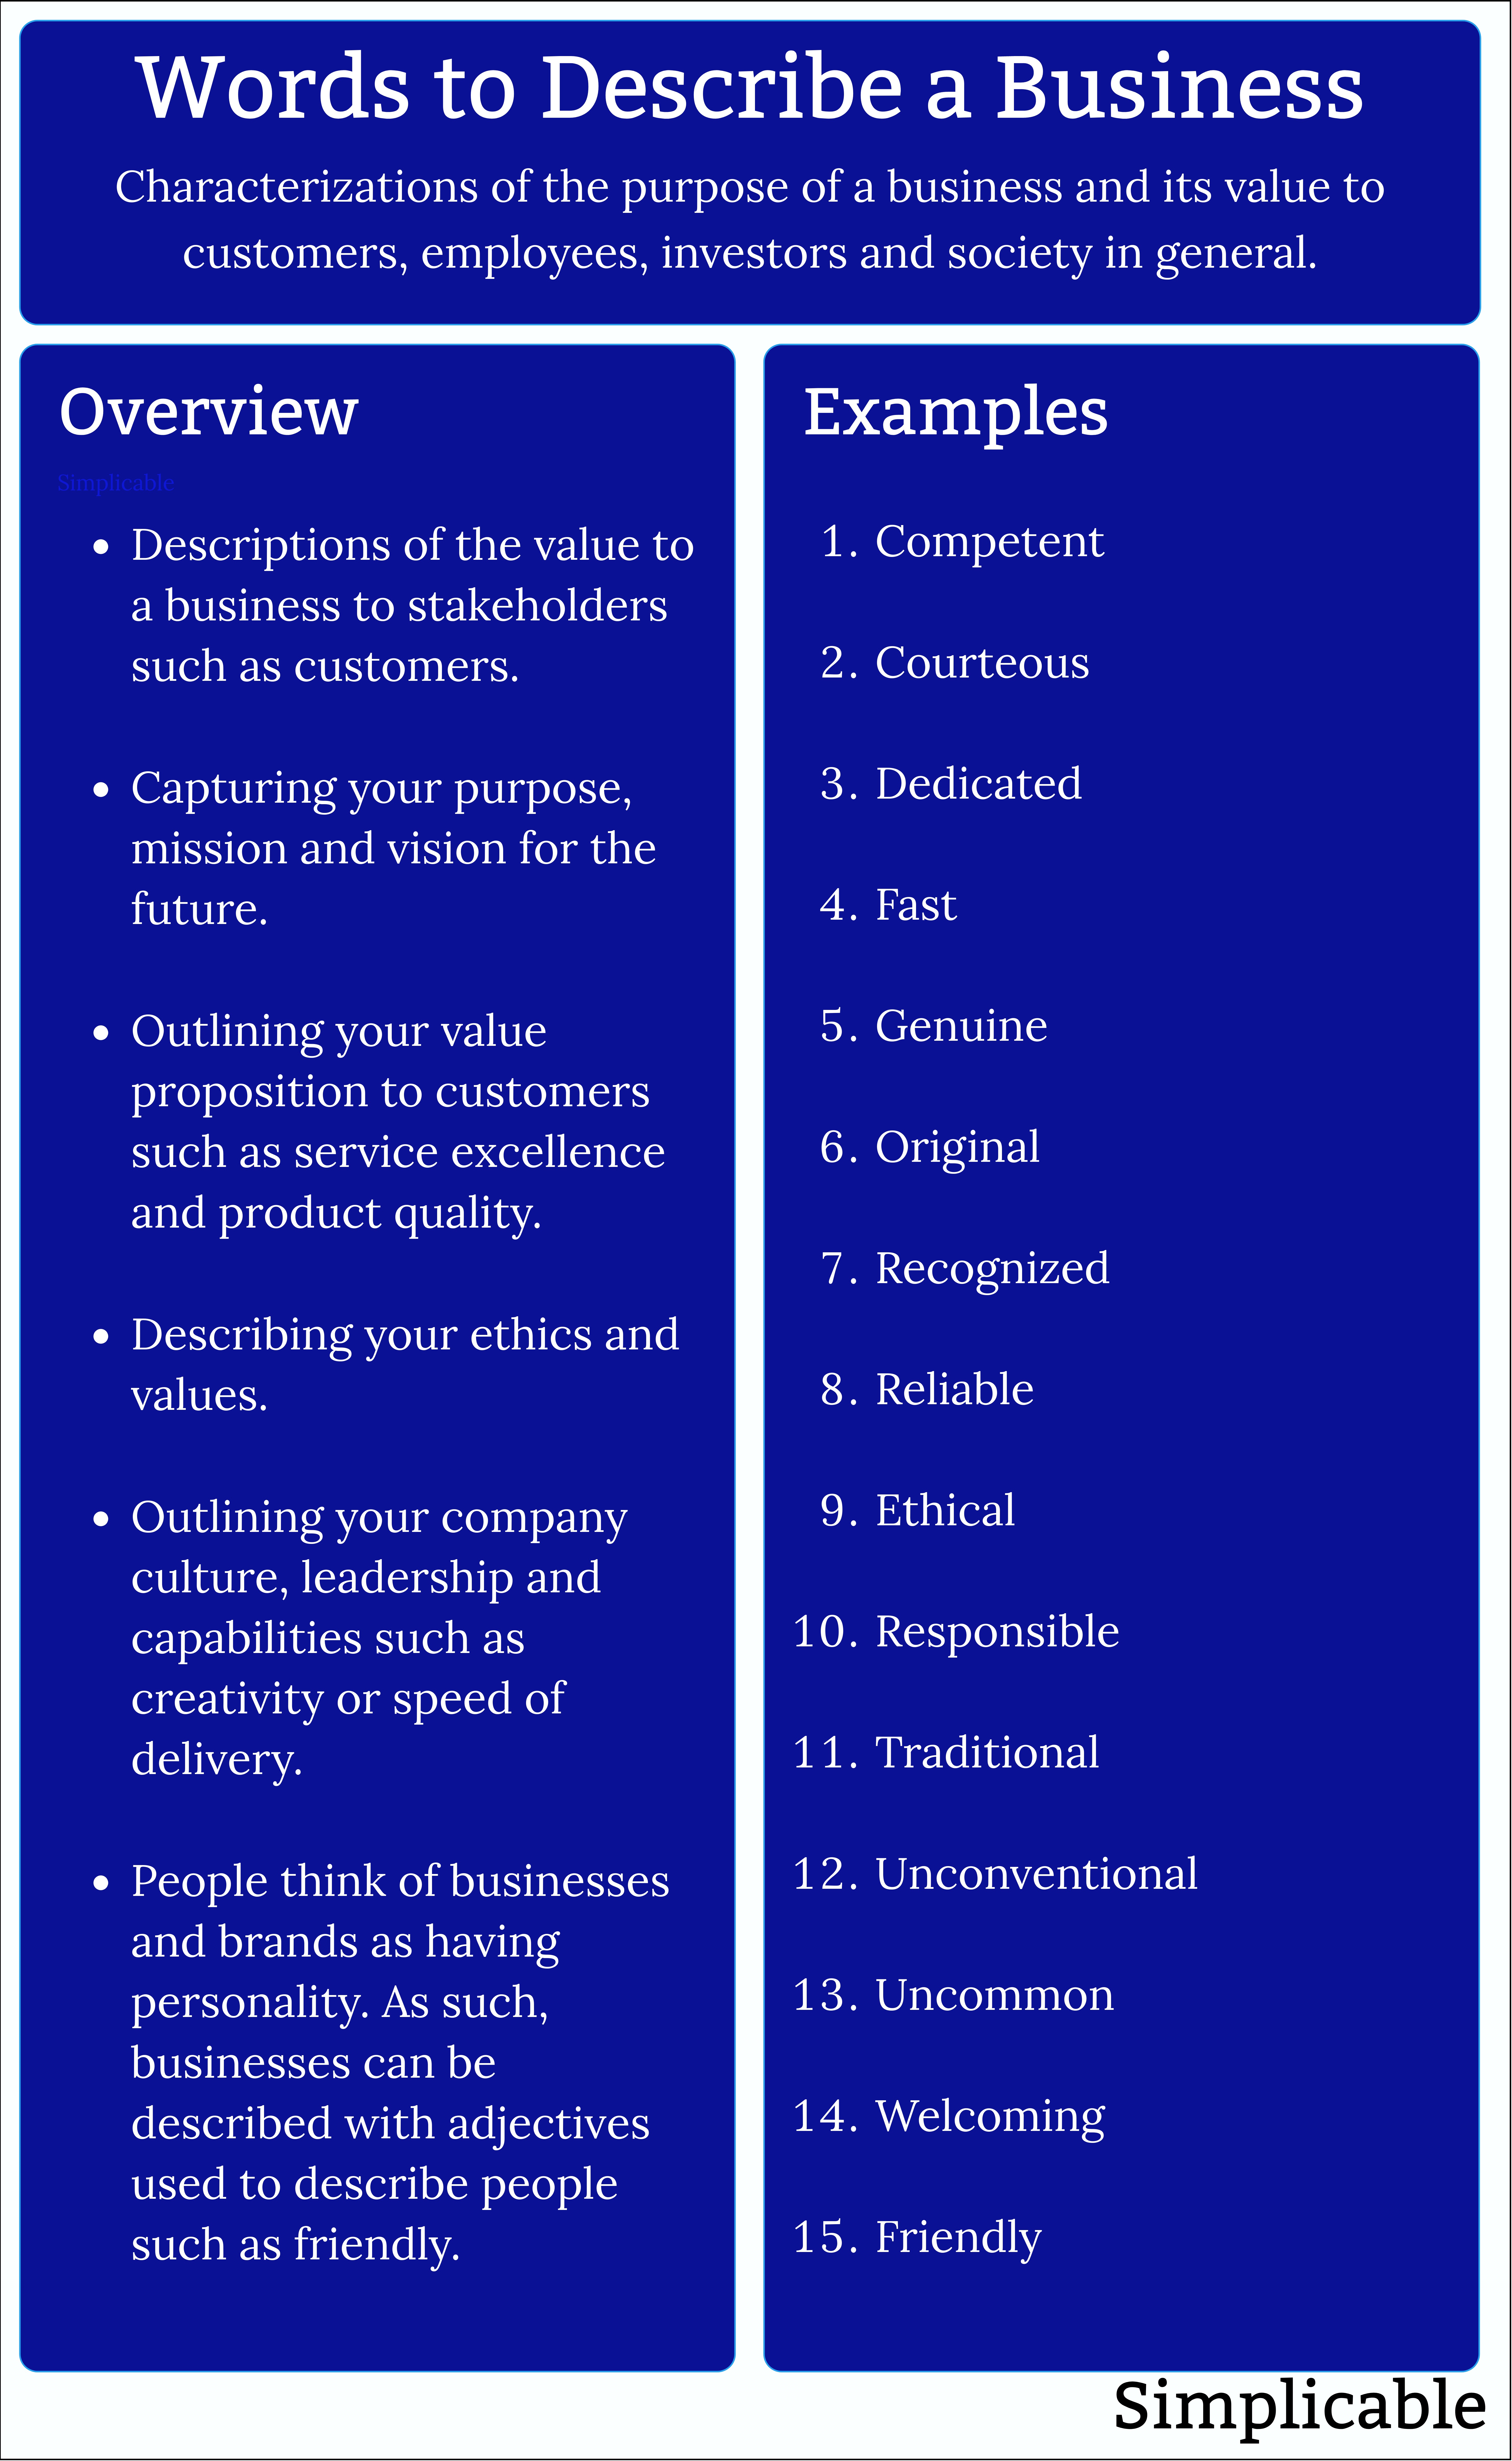 words to describe a business overview and examples